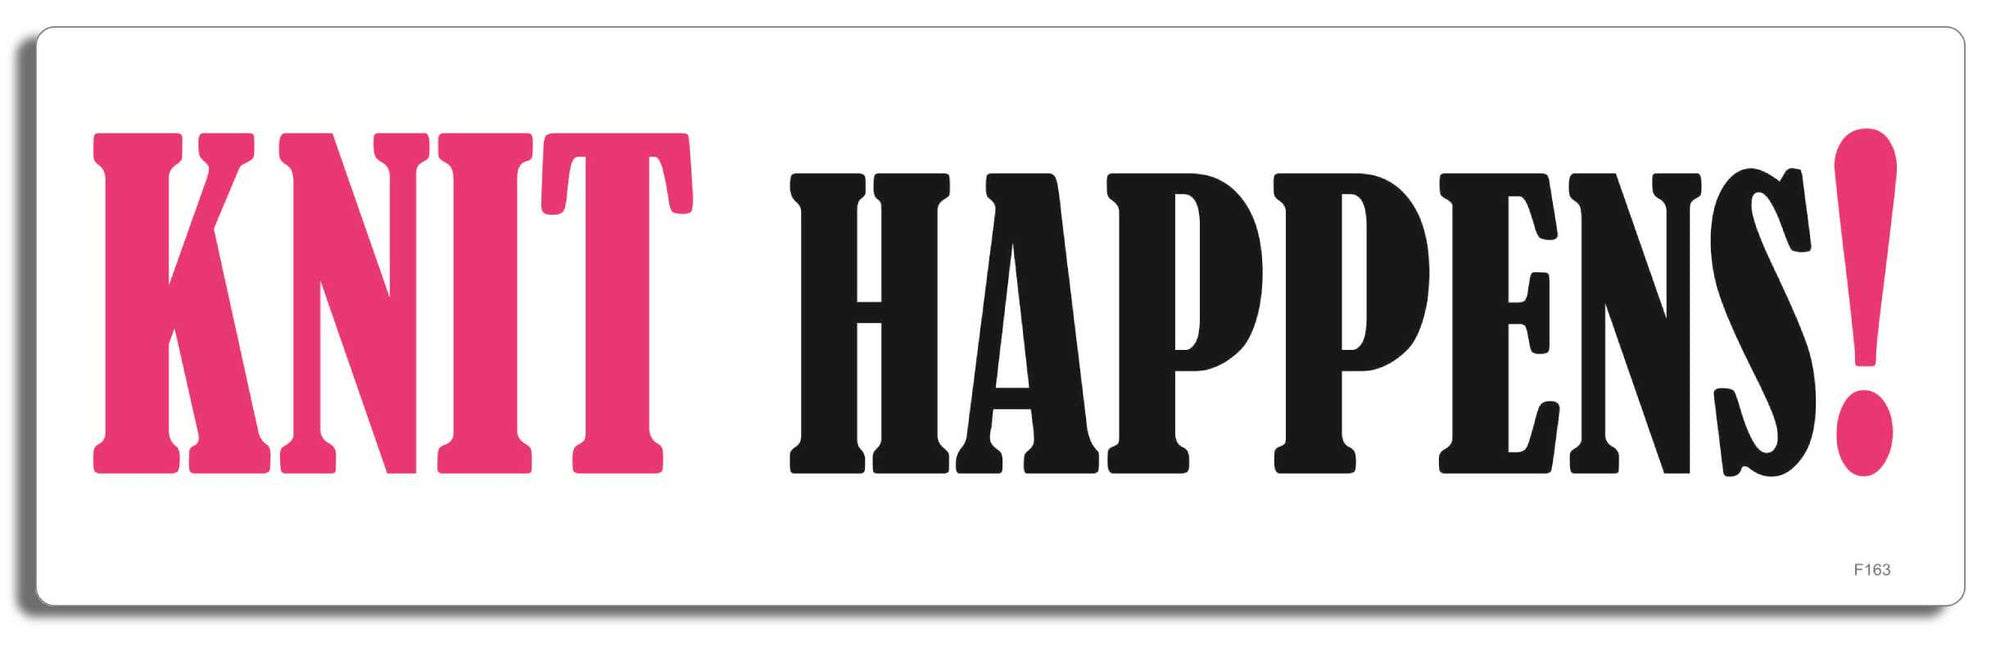 Knit happens! -  3" x 10" Bumper Sticker--Car Magnet- -  Decal funny Bumper Sticker Car Magnet Knit happens!-    Decal for cars funny, funny quote, funny saying